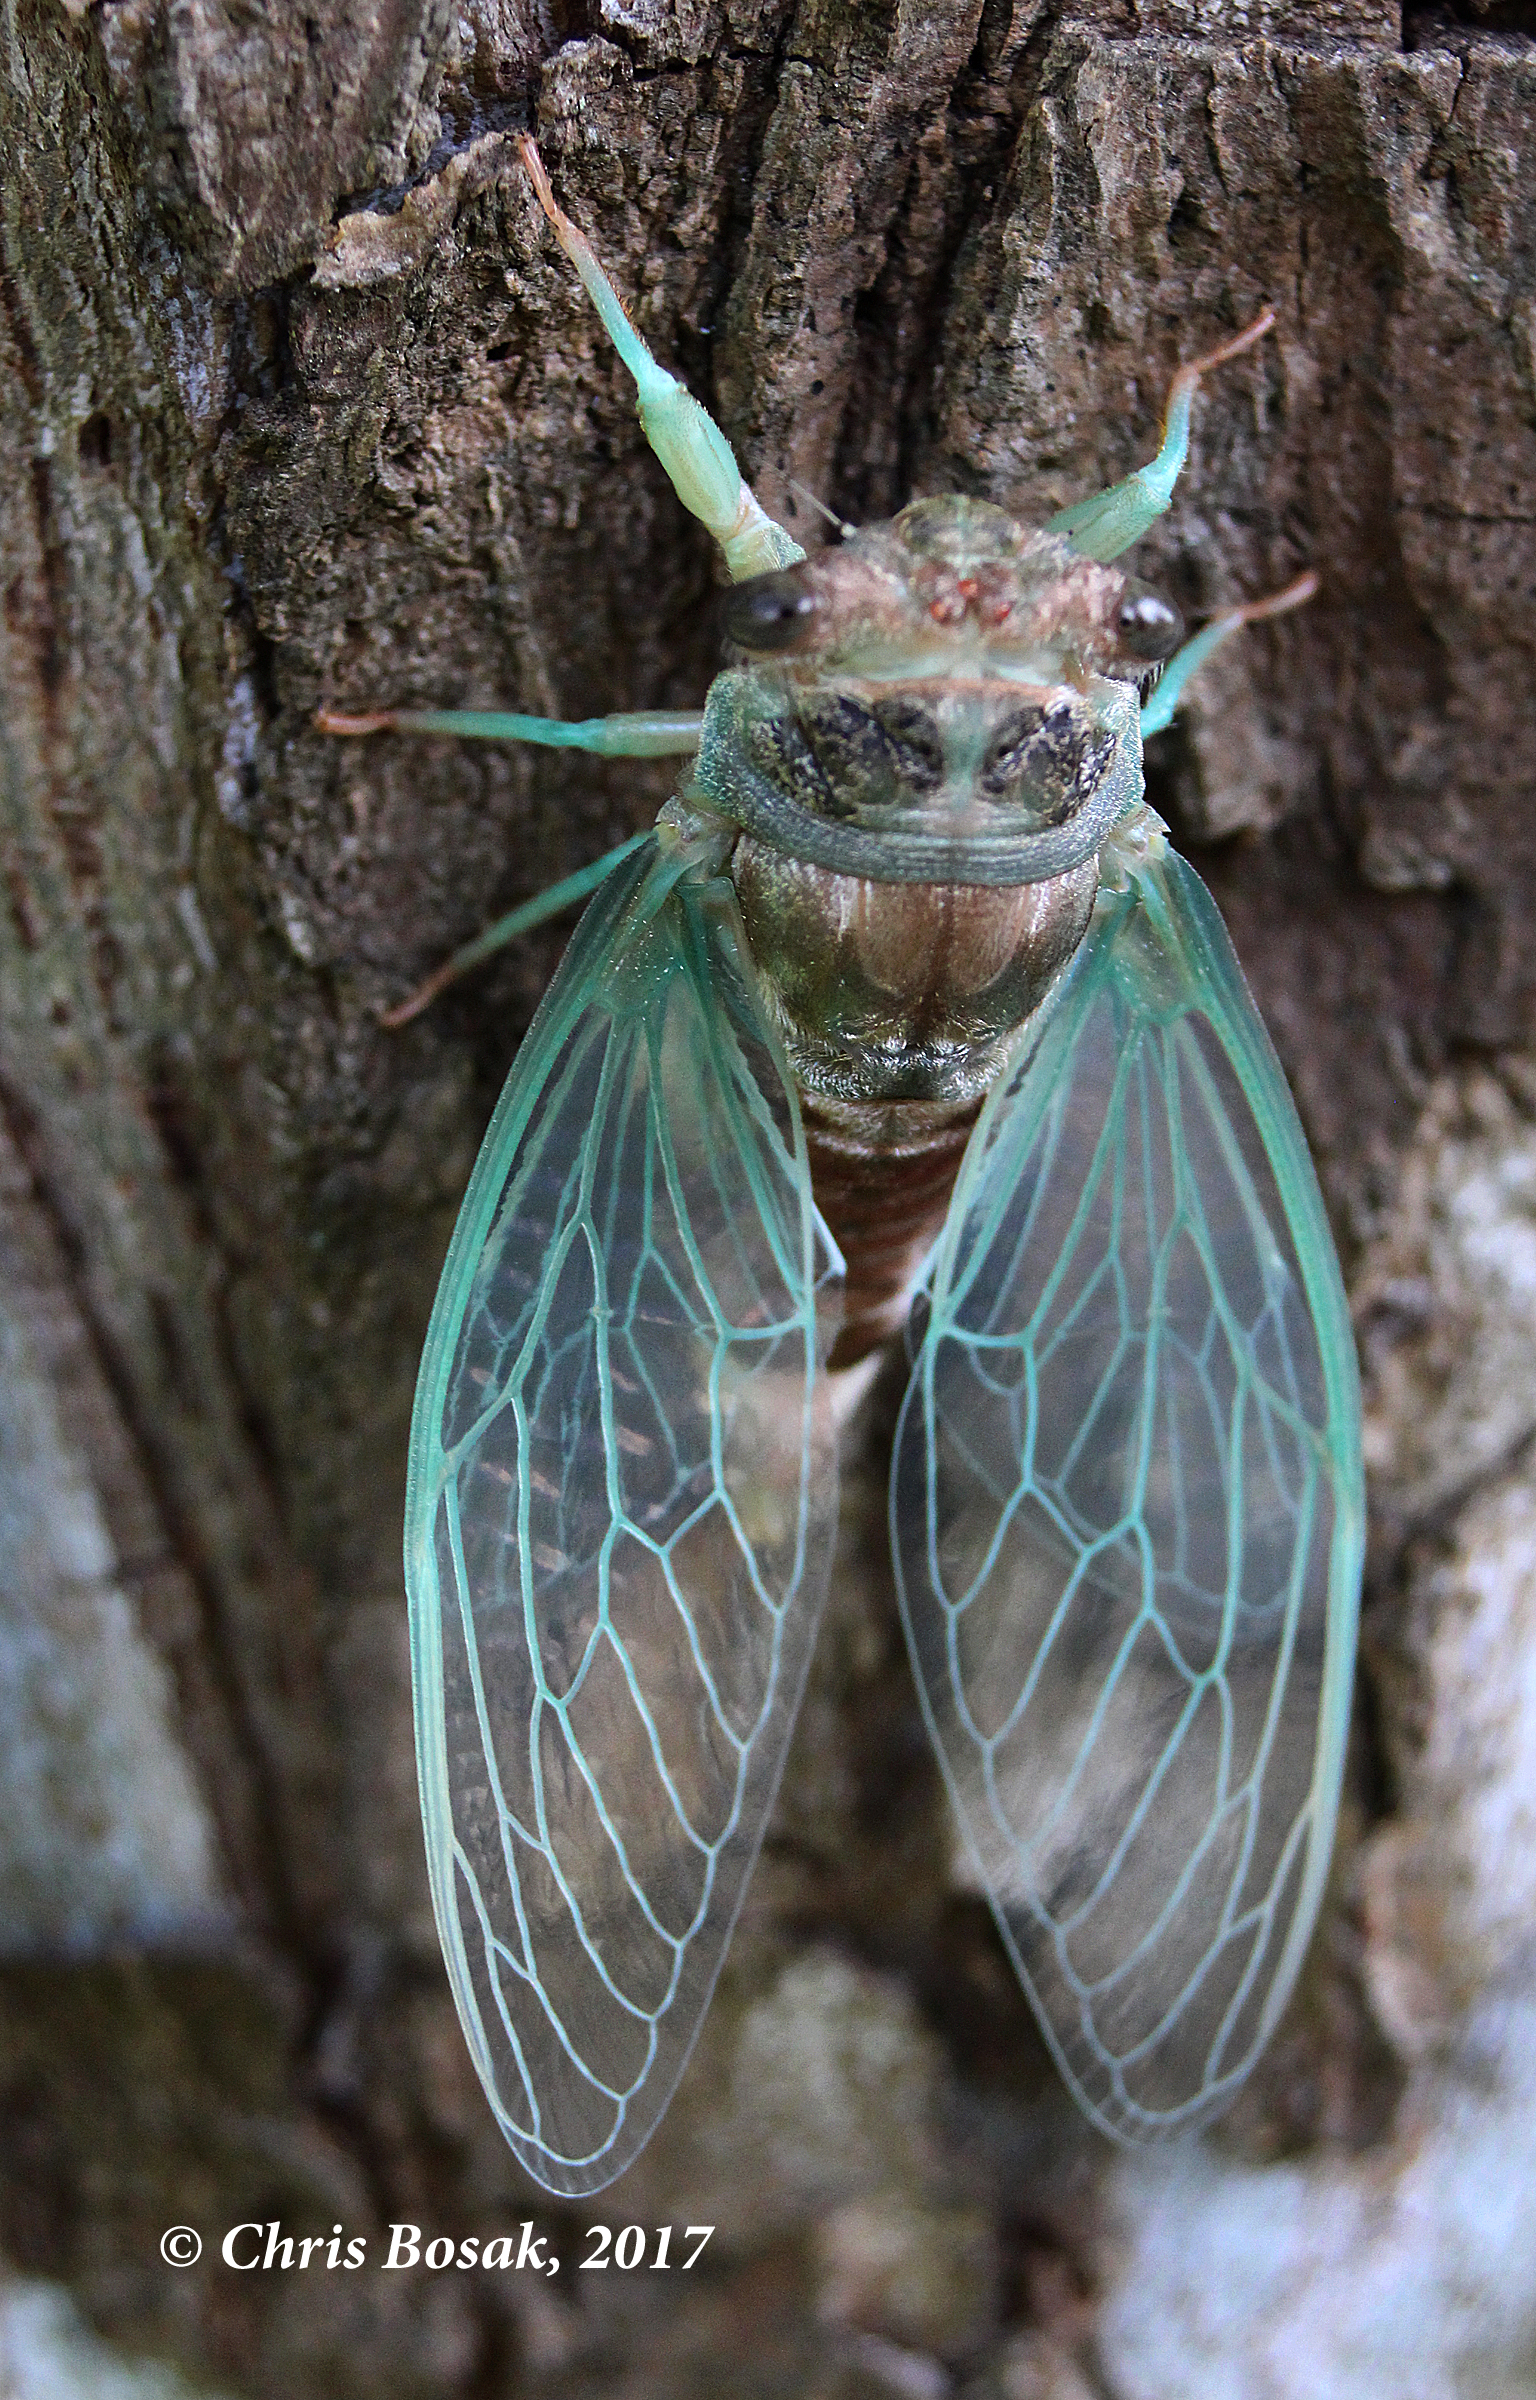 Photo by Chris Bosak A cicada emerges from its nymph exoskeleton on a tree in Danbury, Conn., summer 2017.